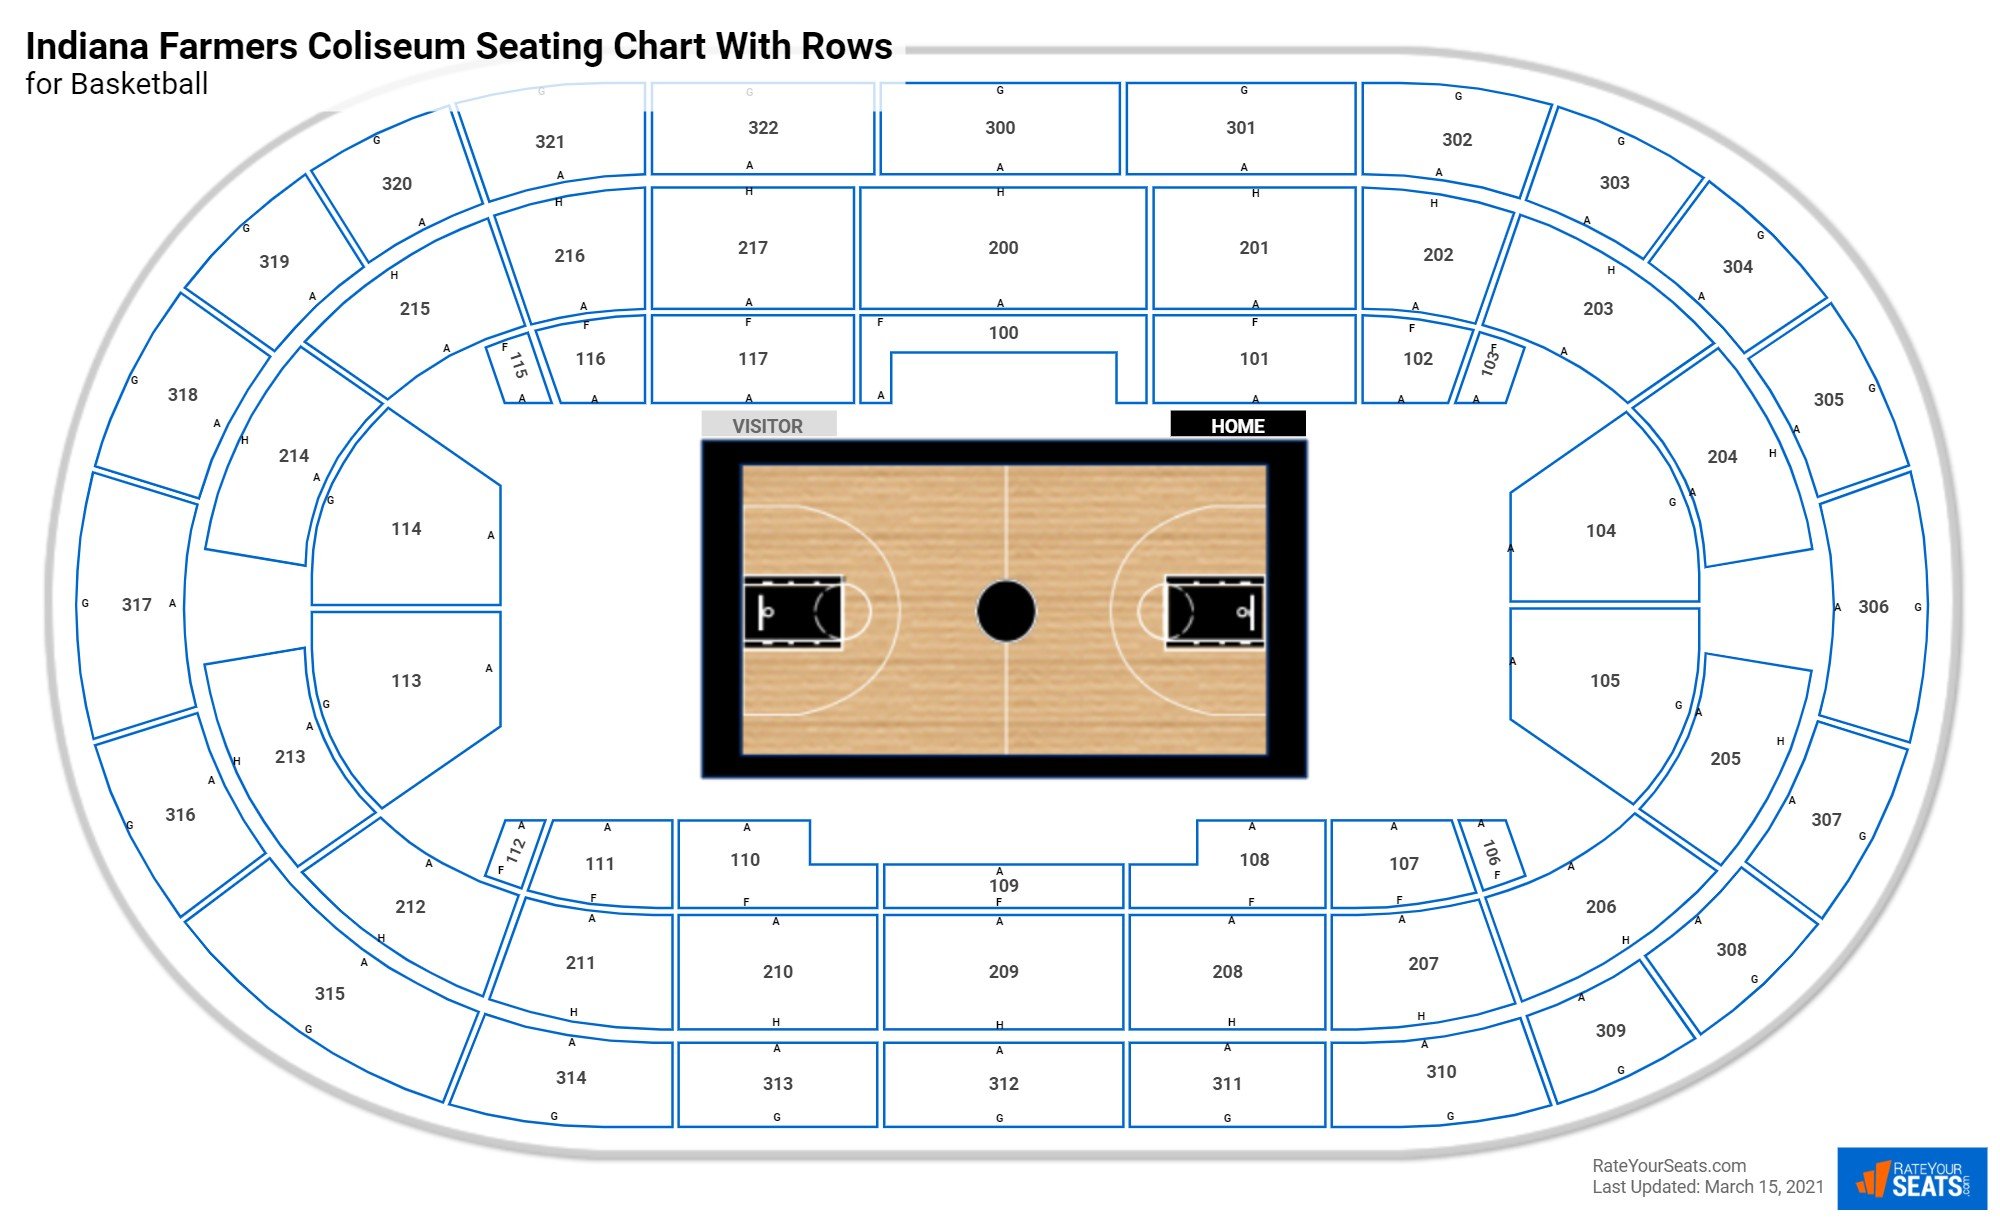 Indiana Farmers Coliseum seating chart with row numbers